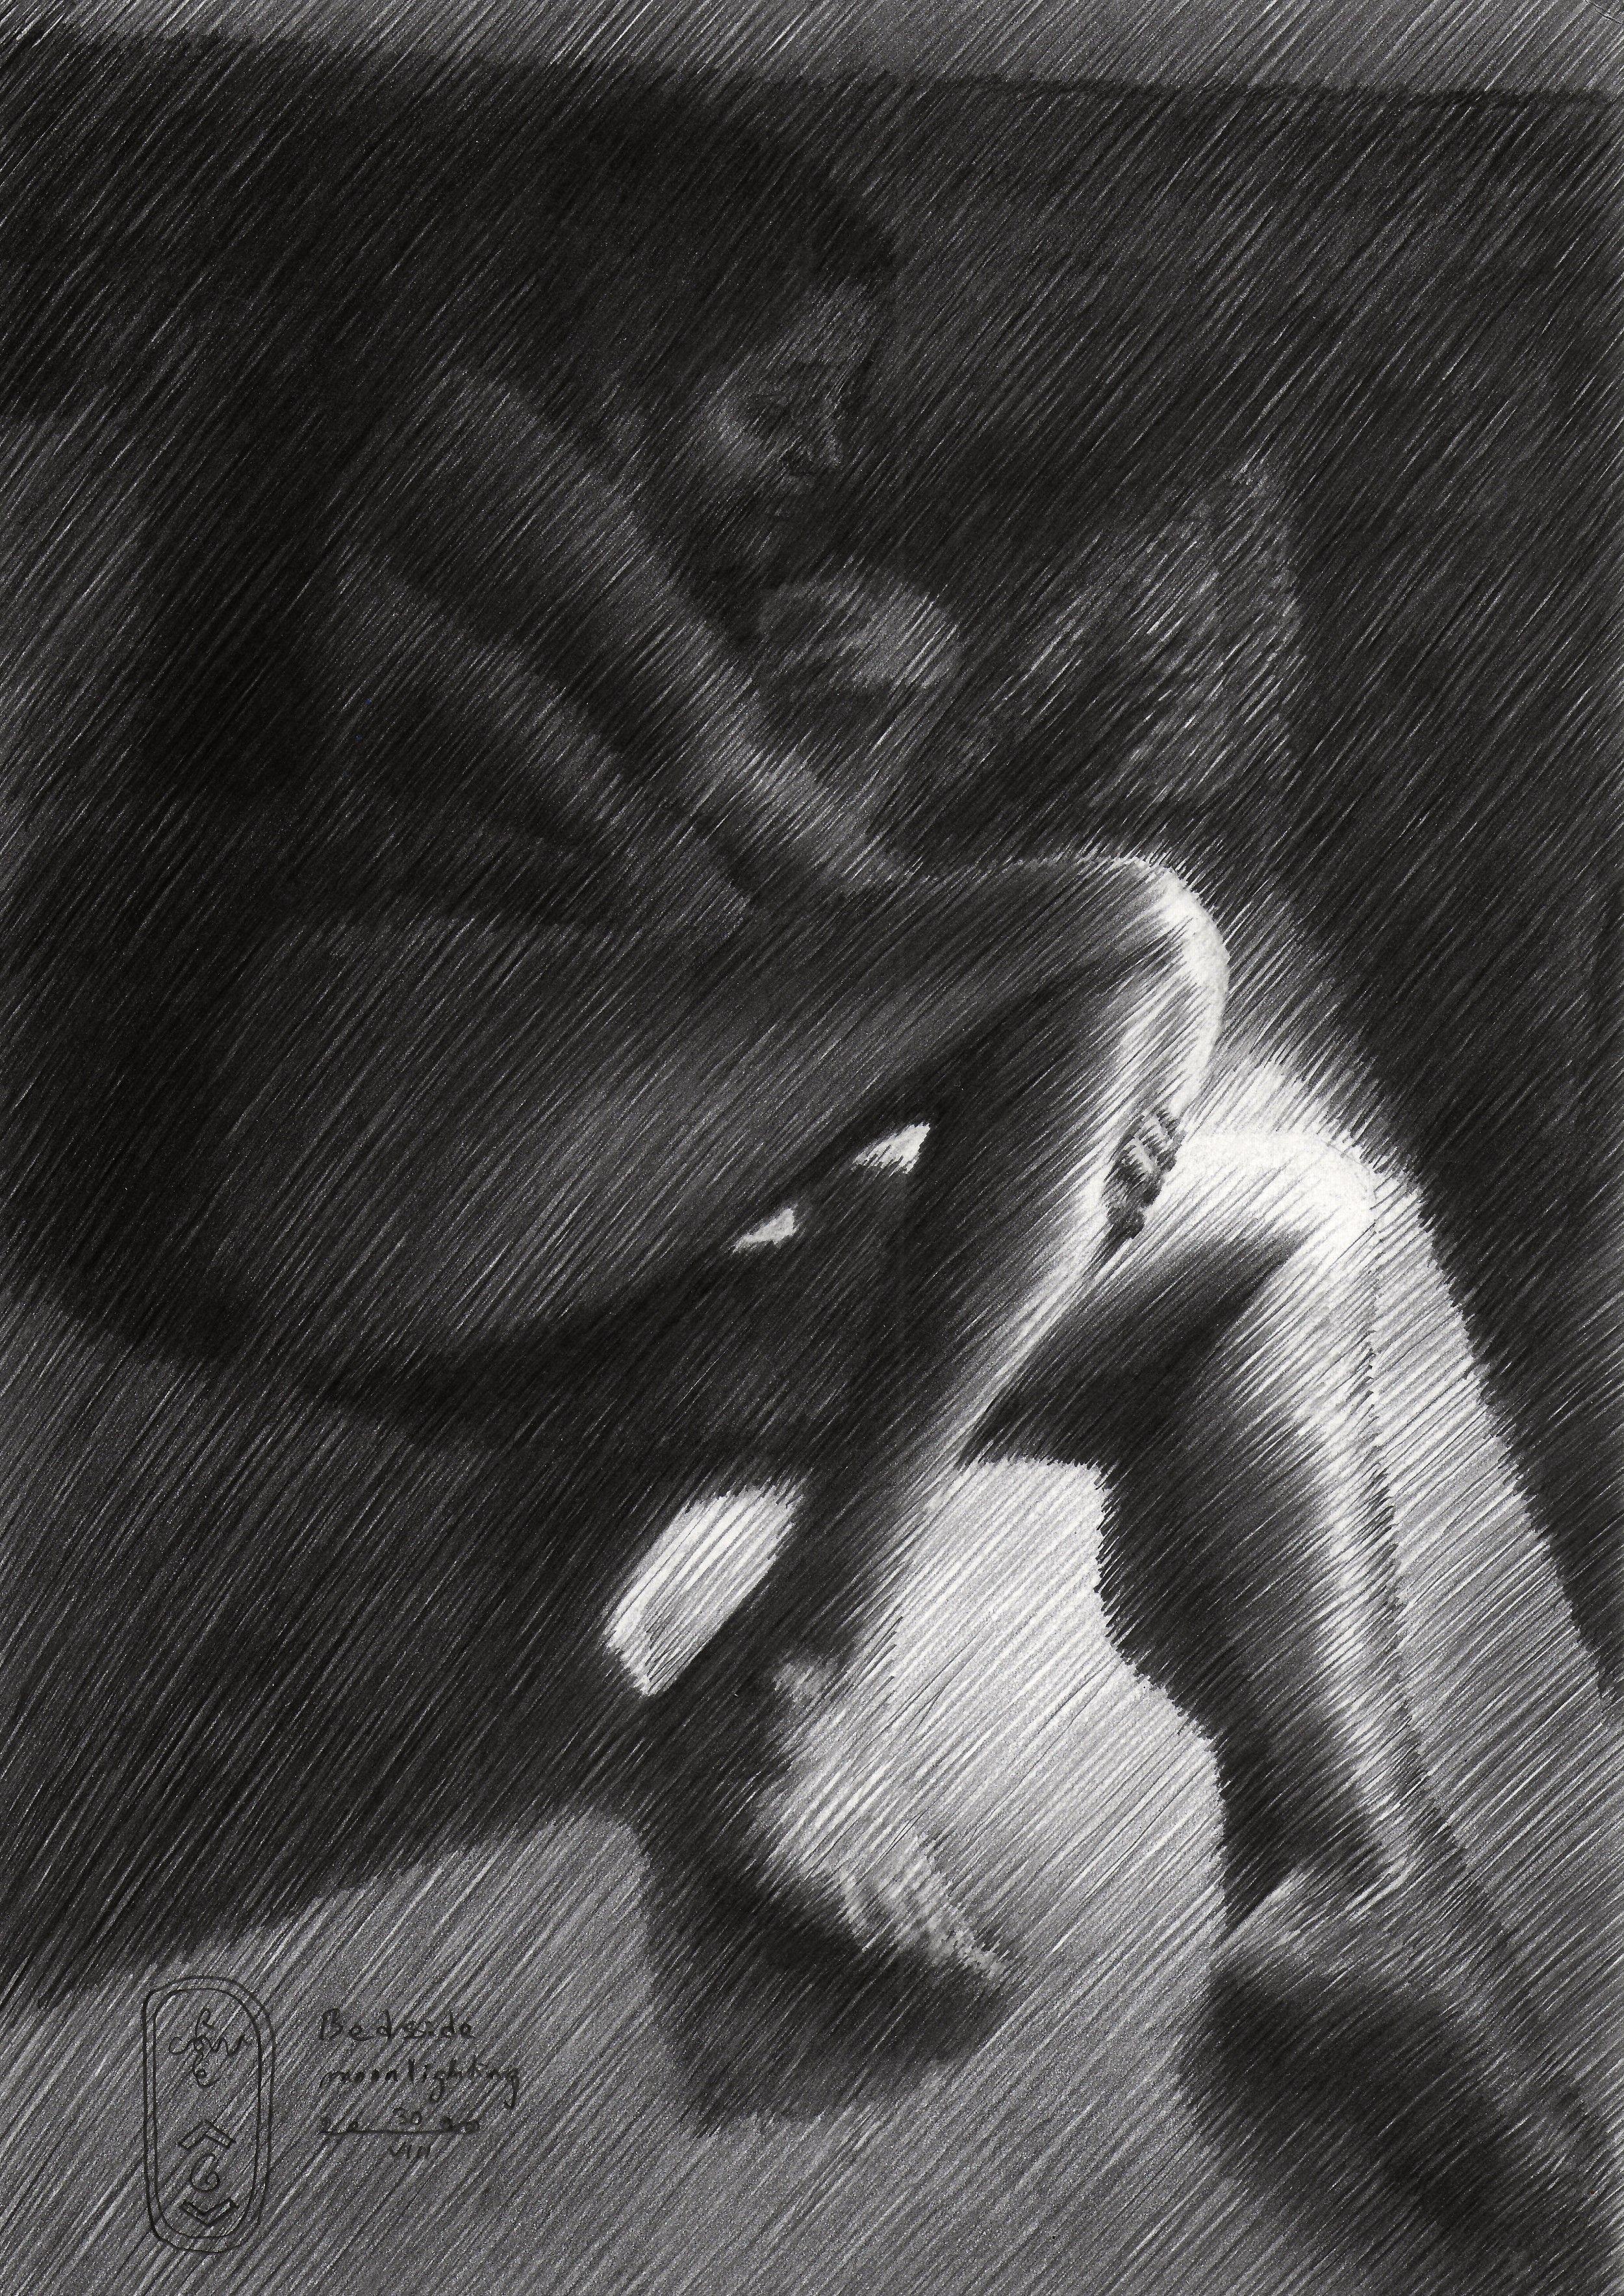 Bedside Moonlighting â€“ 31-08-20, Drawing, Pencil/Colored Pencil on Paper - Art by Corne Akkers